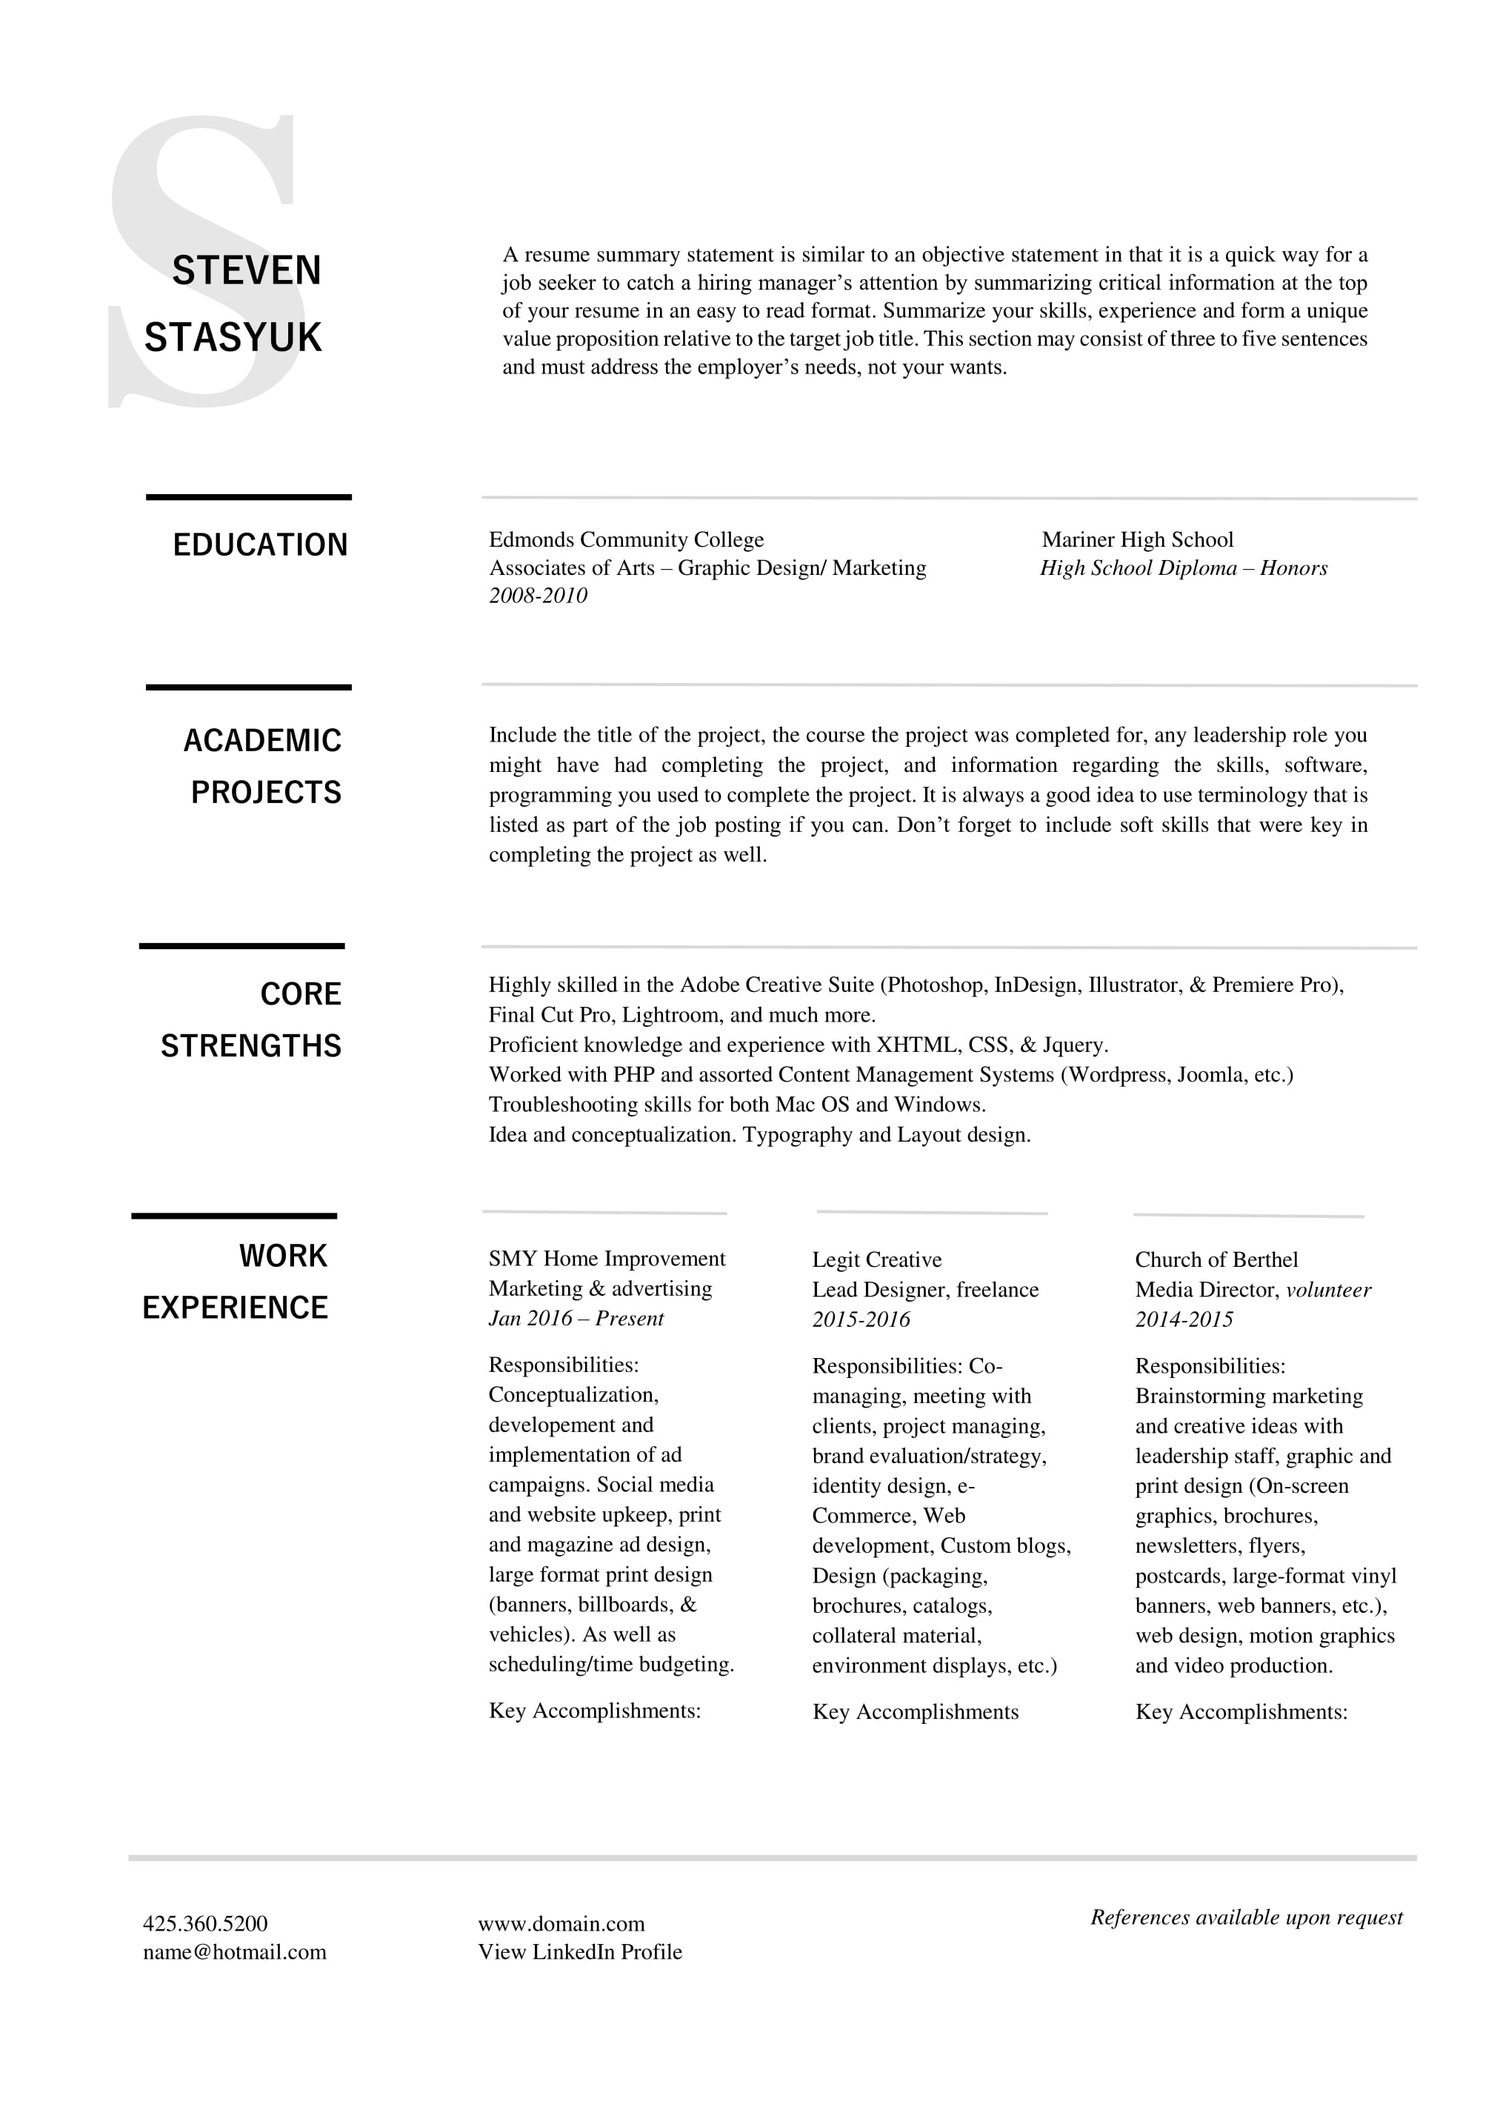 Soft Skills Cover Letter from static1.squarespace.com